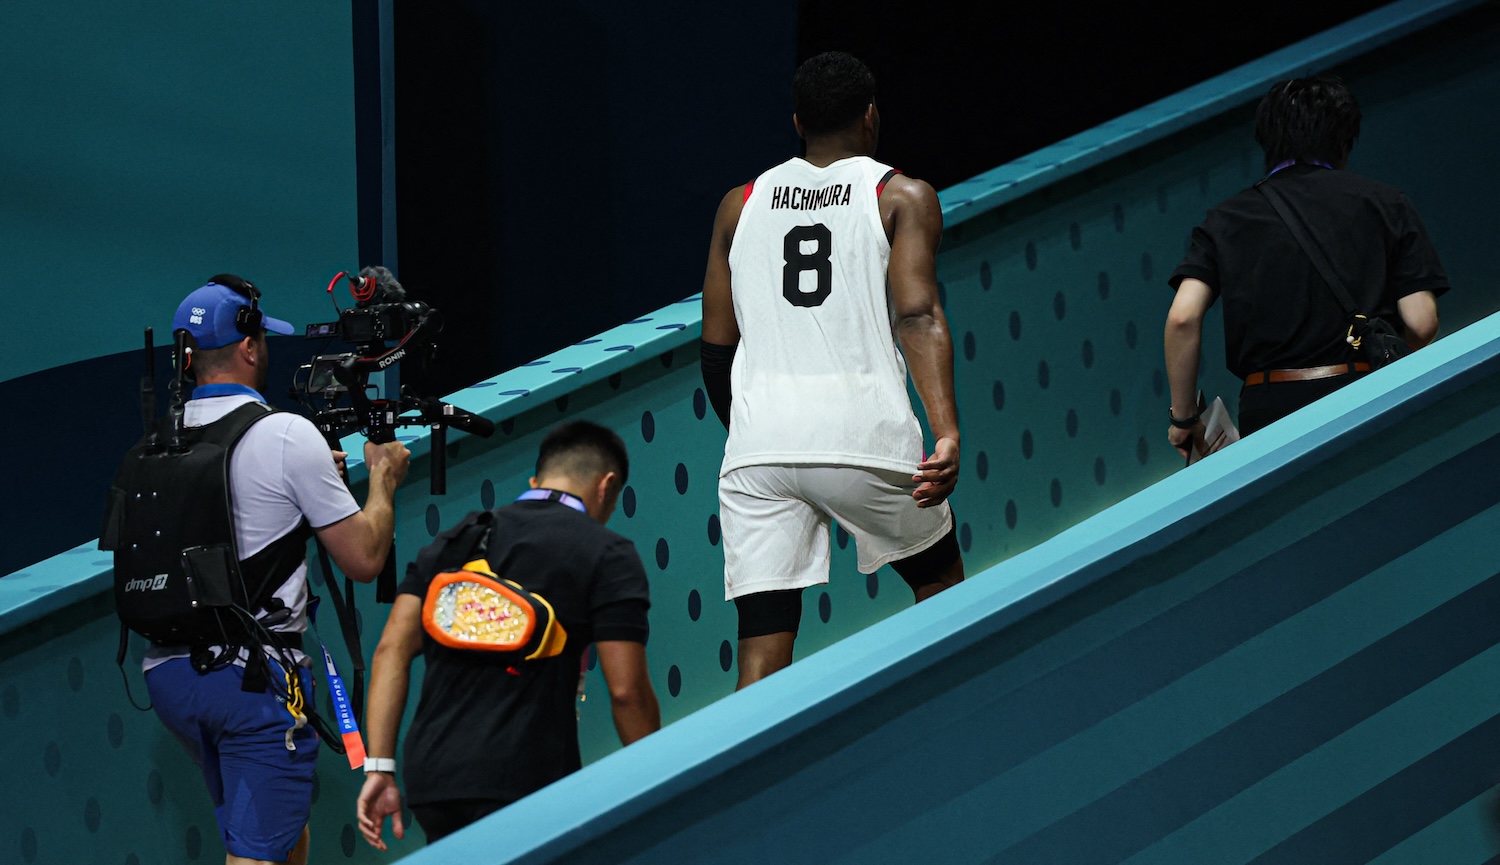 Japan's #08 Rui Hachimura leaves the court after being sent off for committing to successive unsporting fouls in the men's preliminary round group B basketball match between Japan and France during the Paris 2024 Olympic Games at the Pierre-Mauroy stadium in Villeneuve-d'Ascq, northern France, on July 30, 2024.